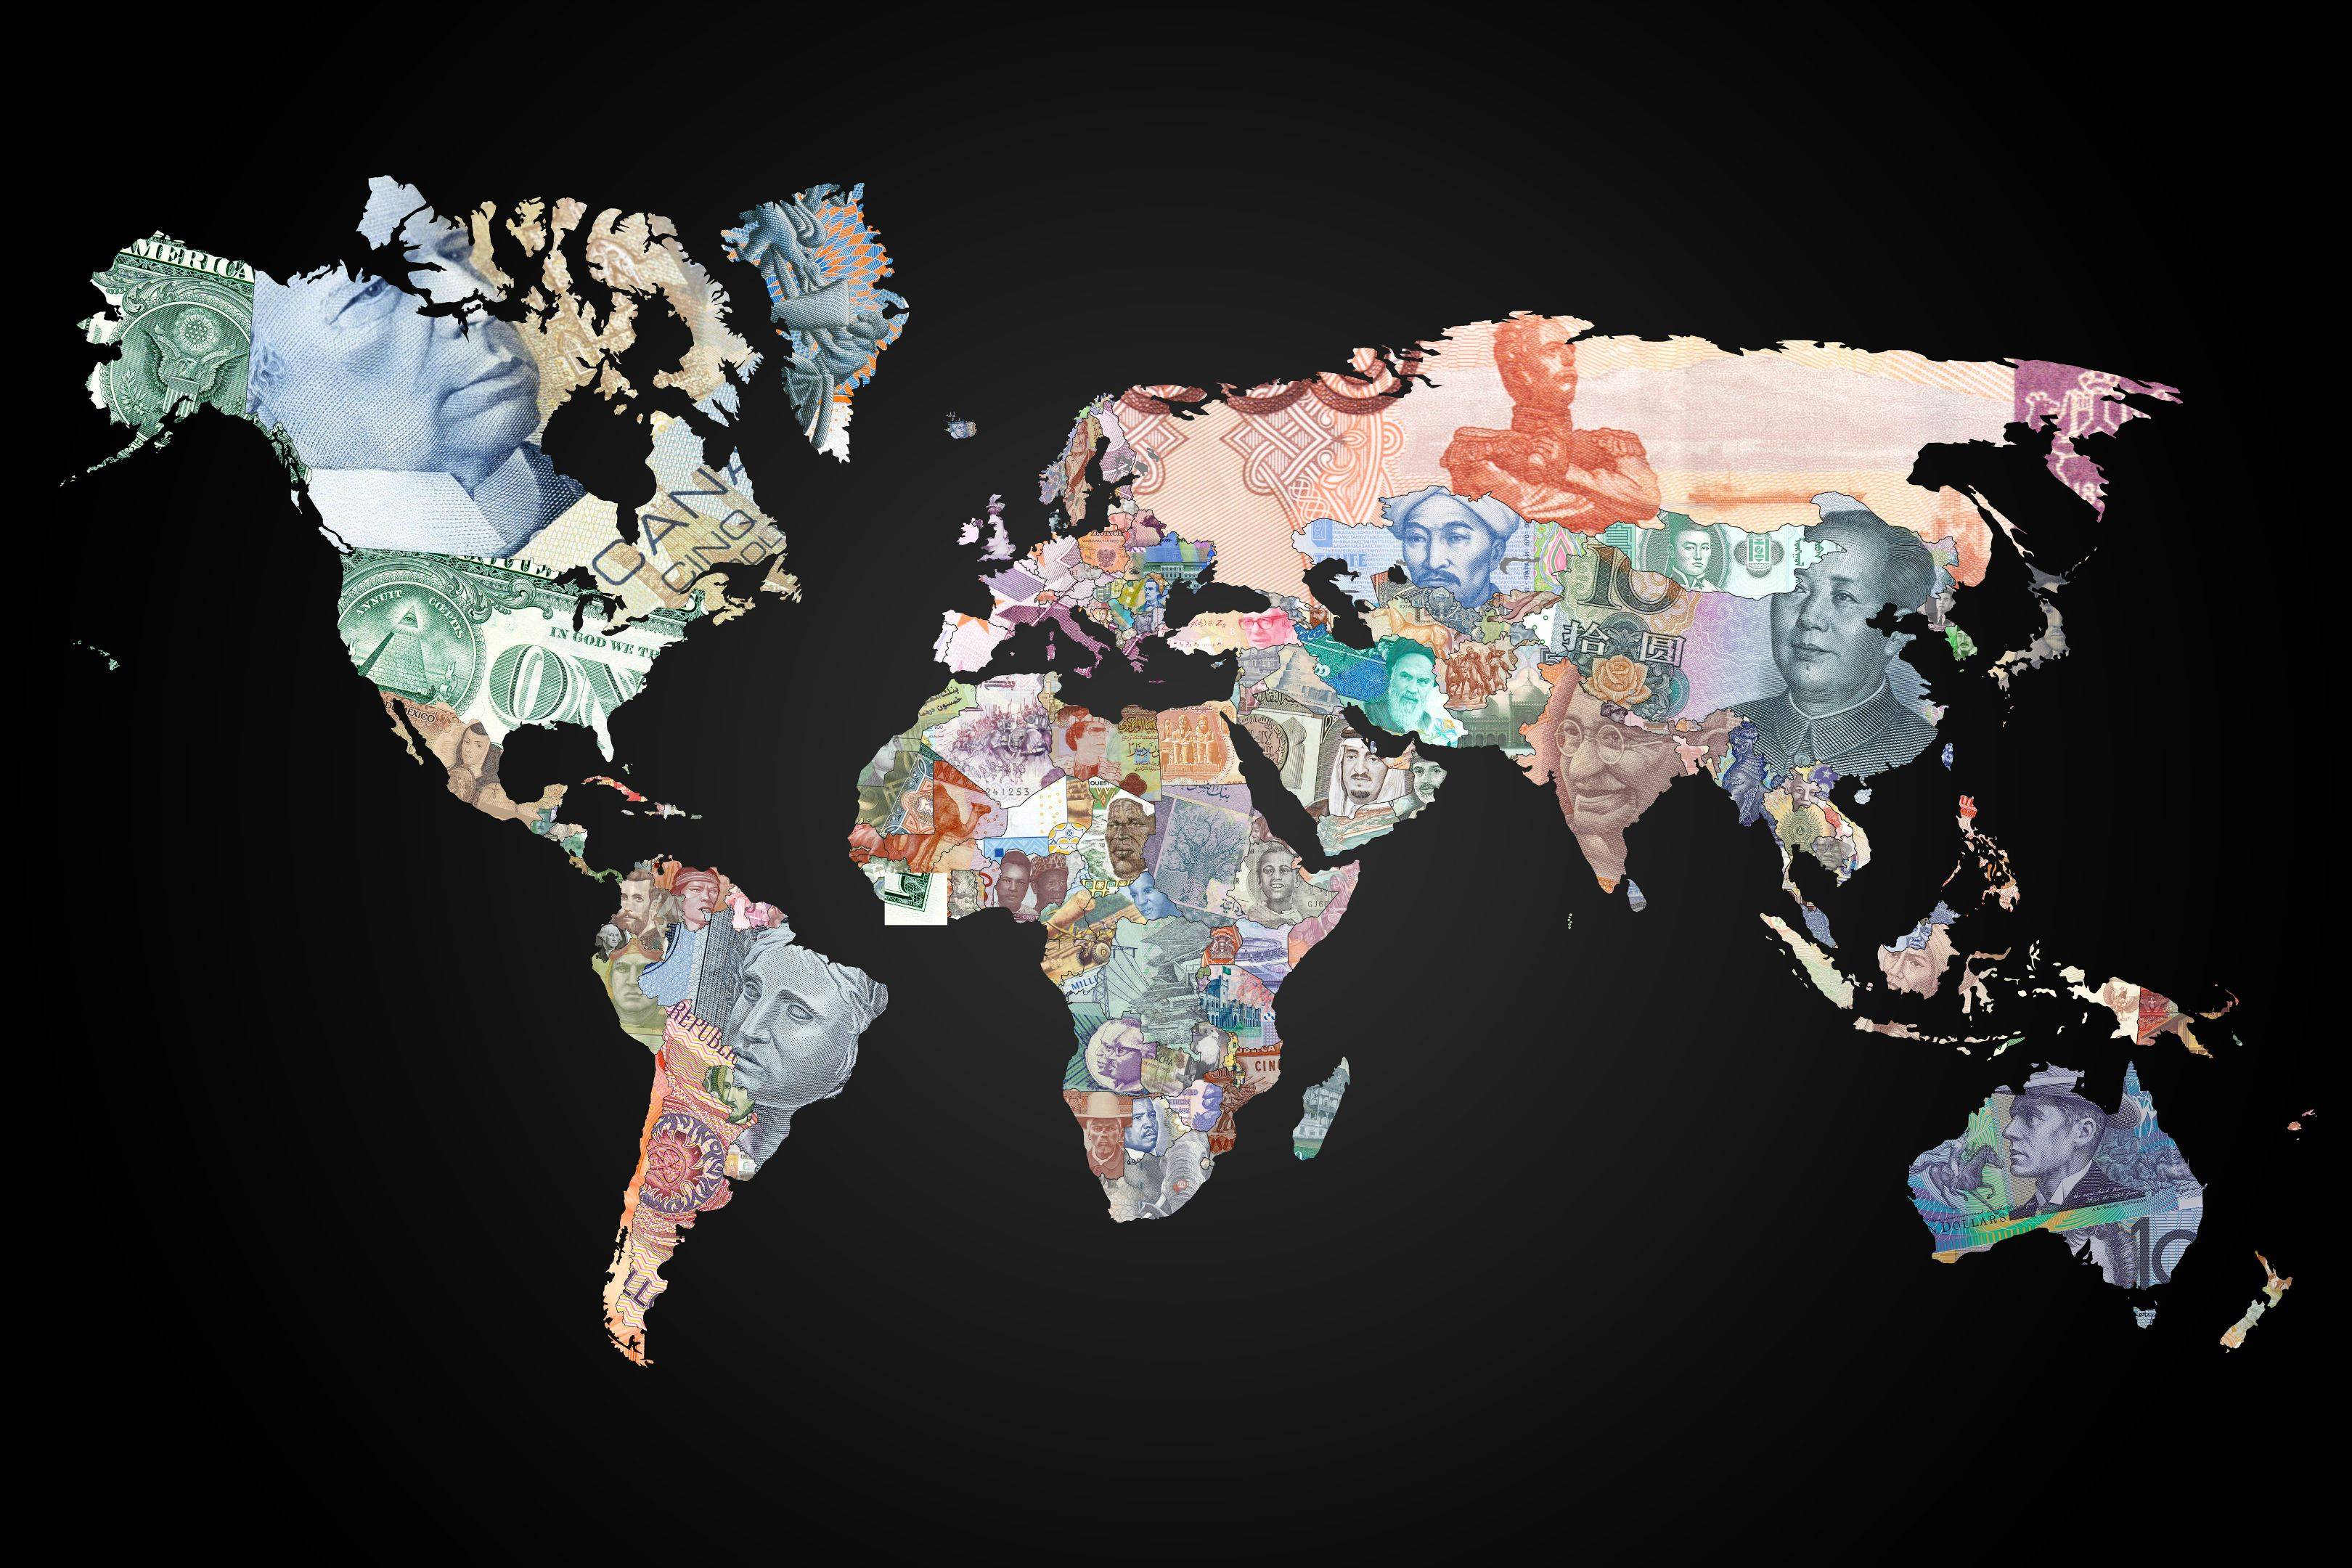 Free download ] World Atlas Representing Countries With Their Currencies [ Desktop [3240x2160] for your Desktop, Mobile & Tablet. Explore Live World Map Desktop Wallpaper. Map Wallpaper for Walls, Map